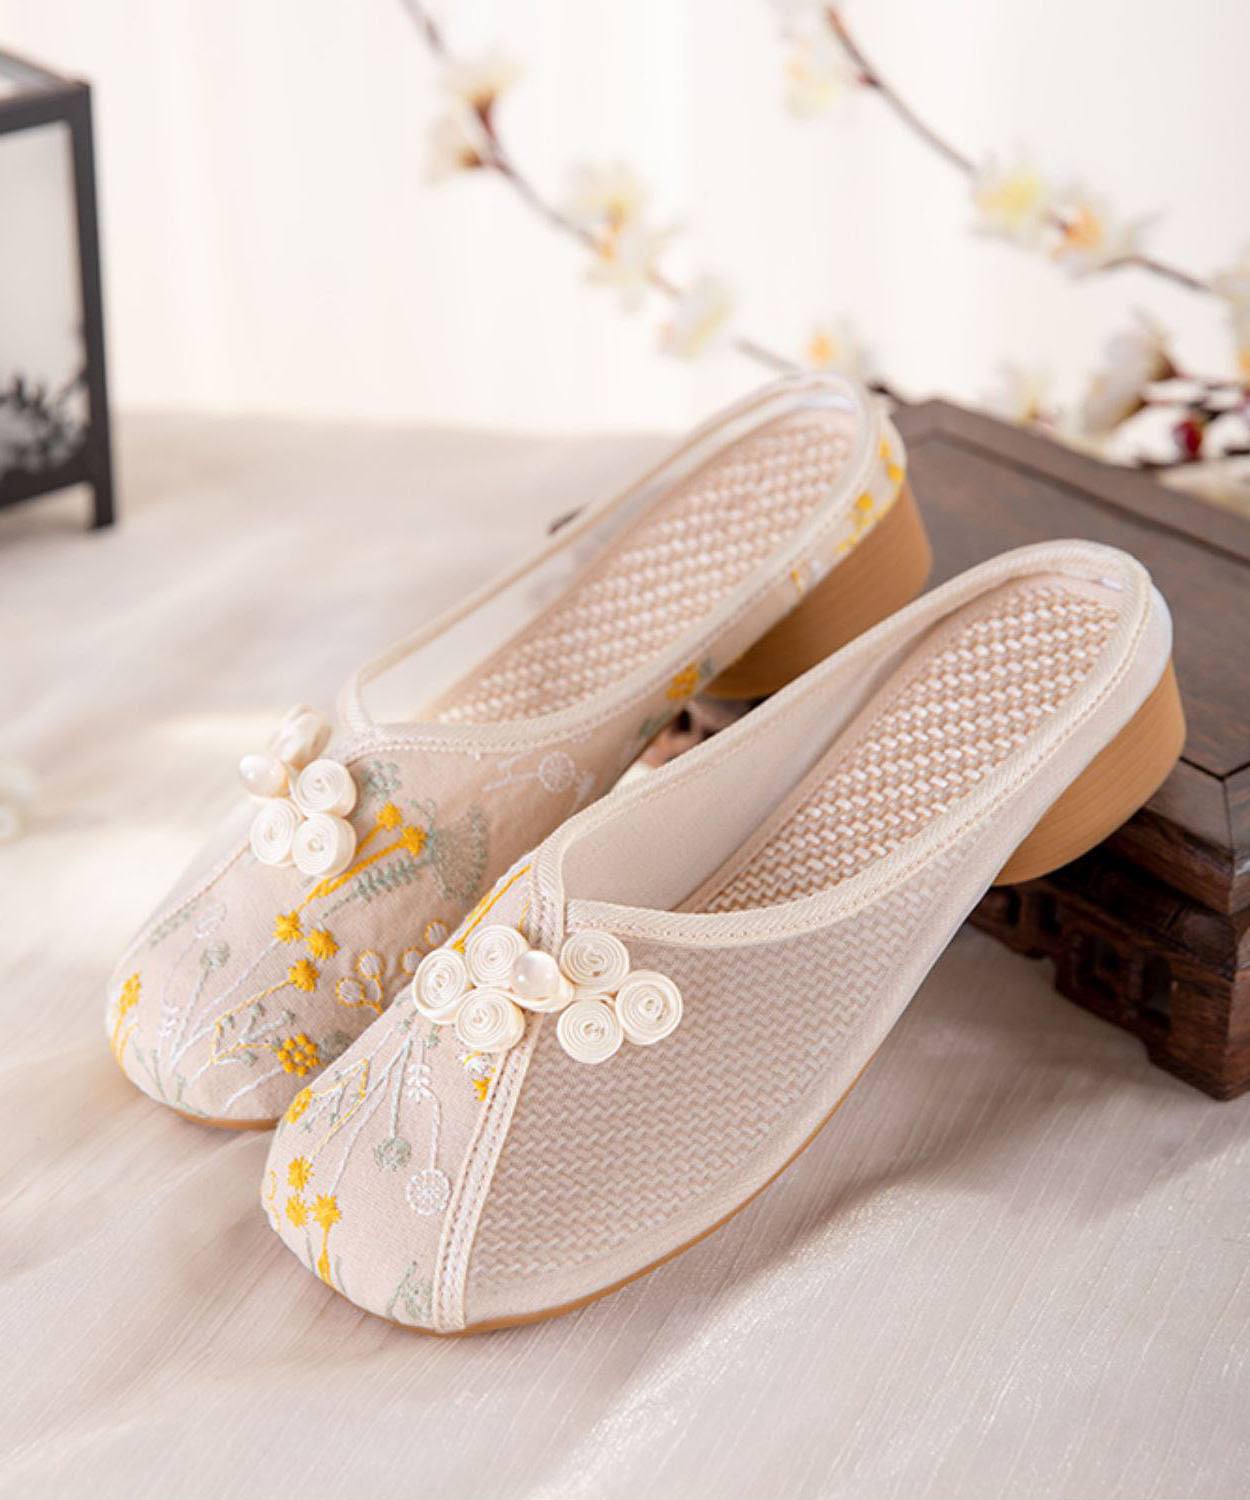 Beige Embroideried Slide Sandals Women Tulle Boho Splicing LY7625